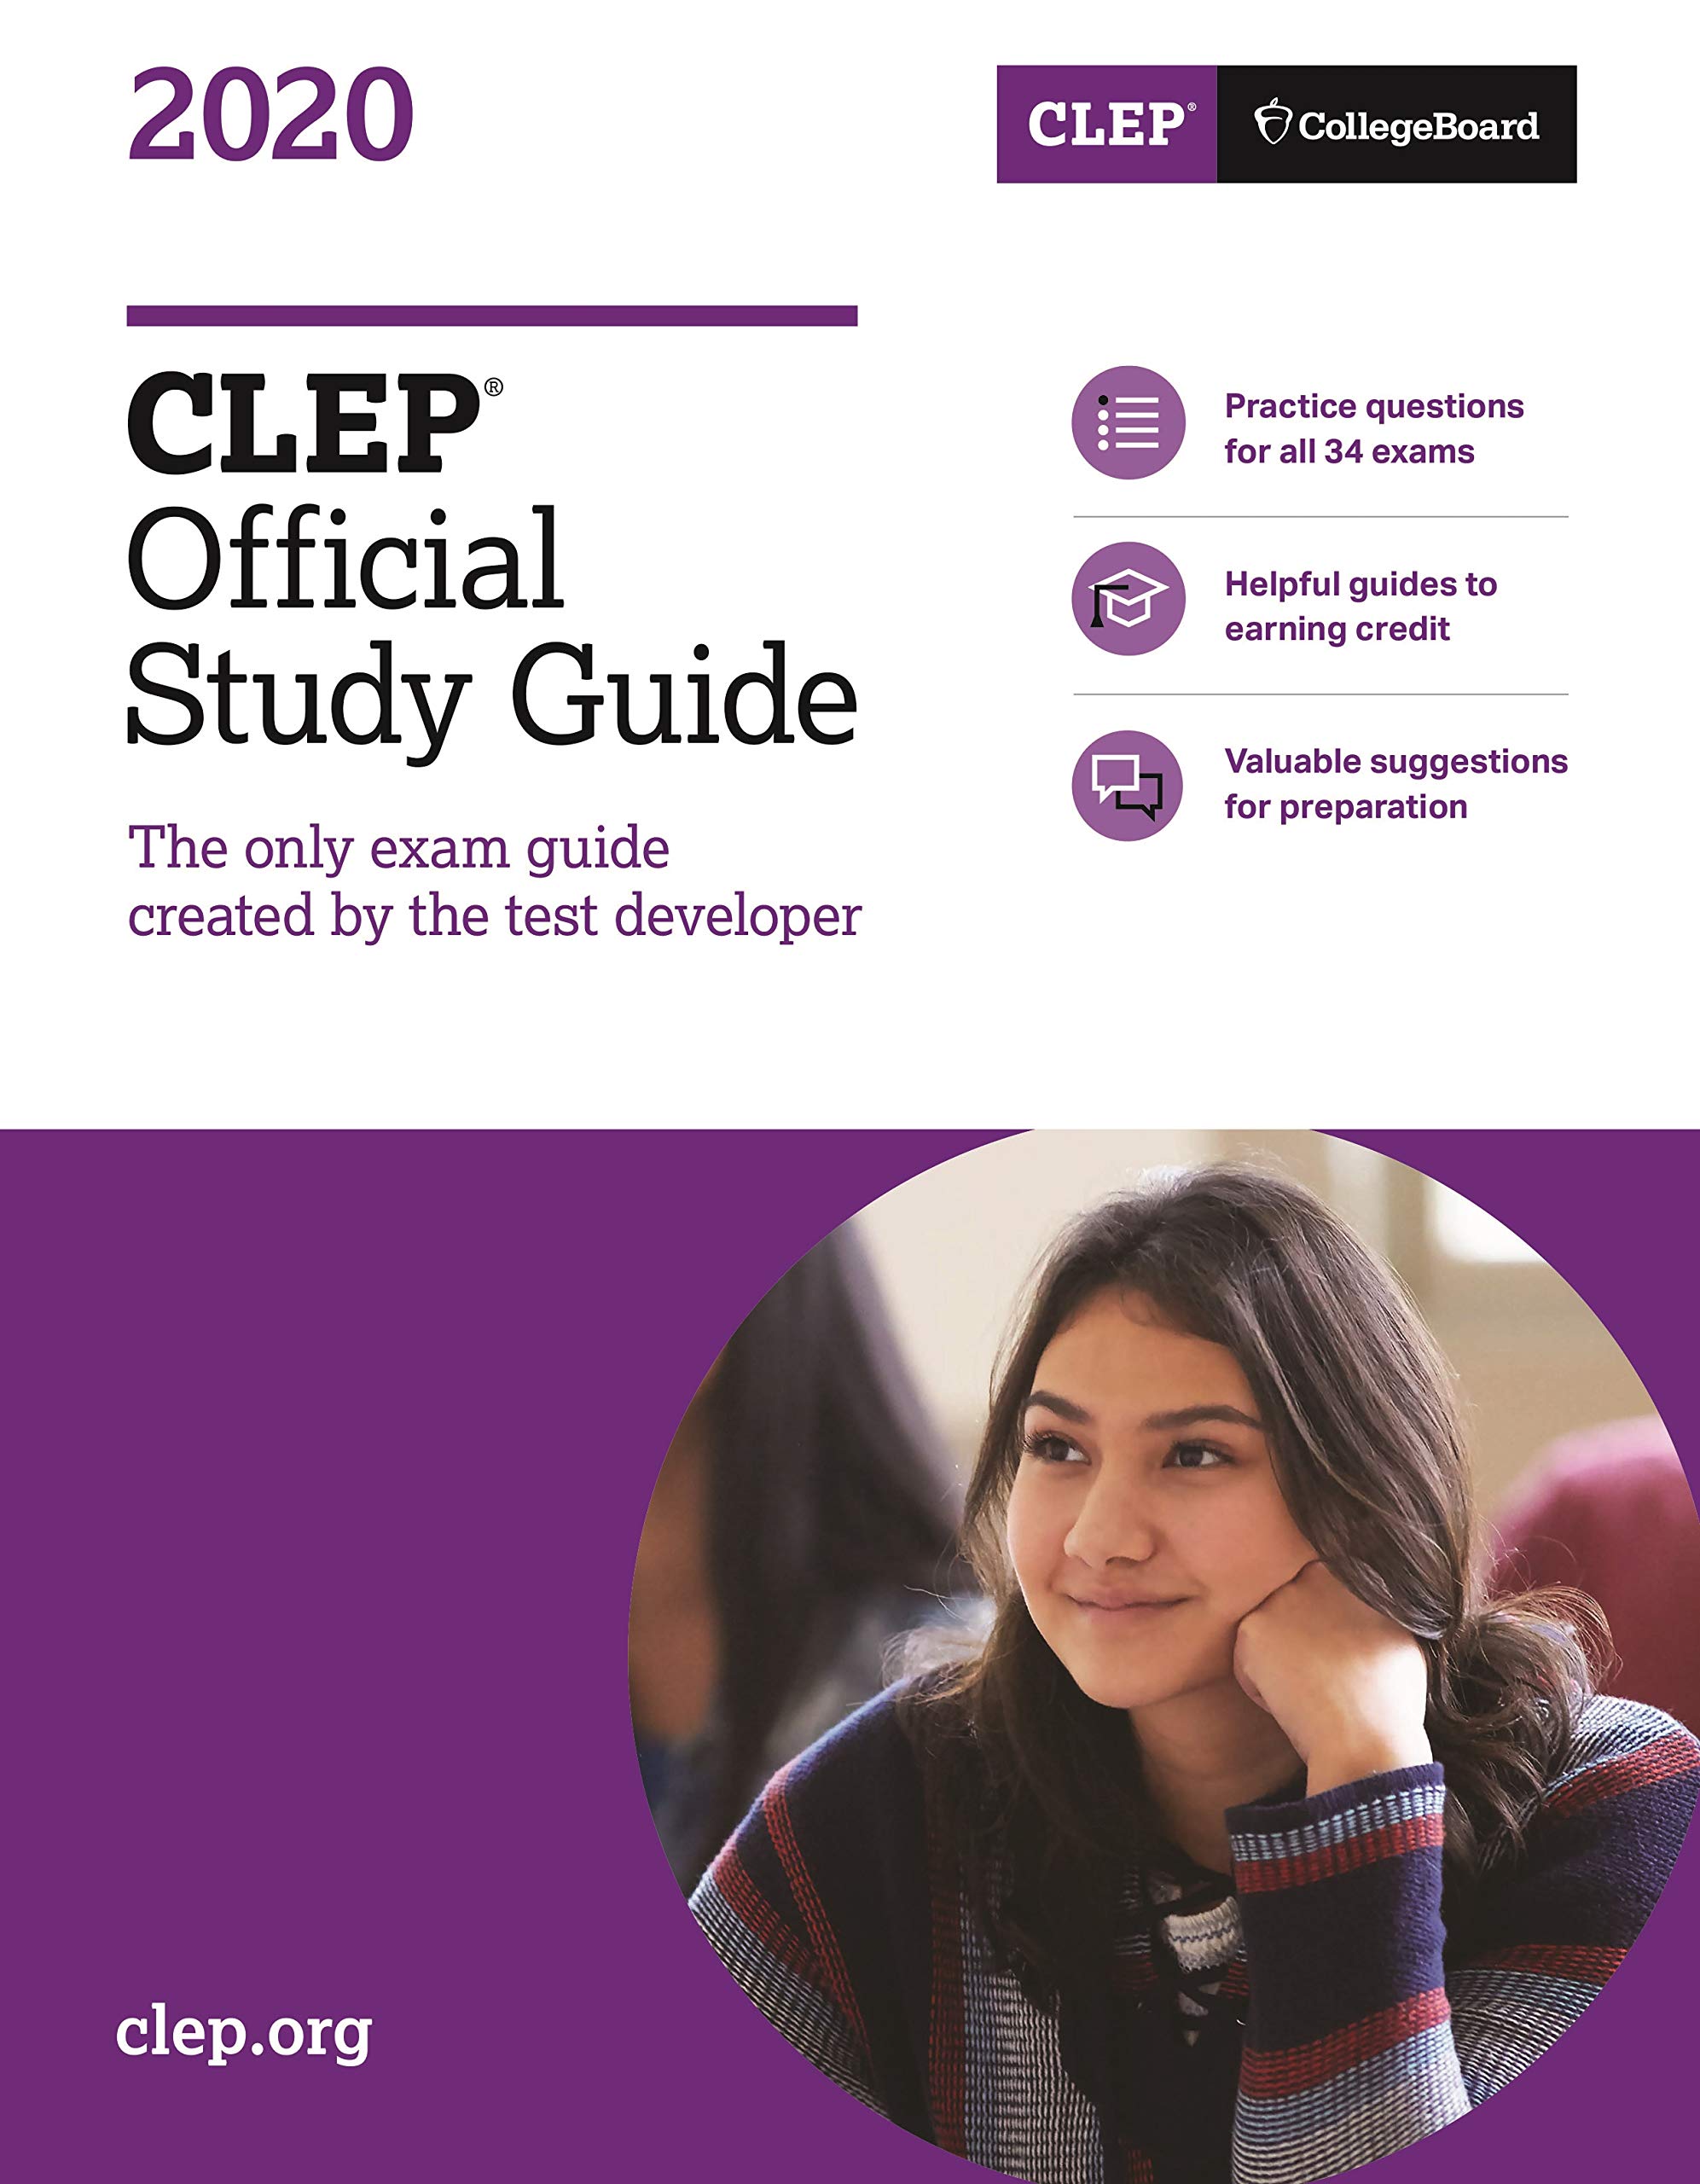 CLEP Official Study Guide 